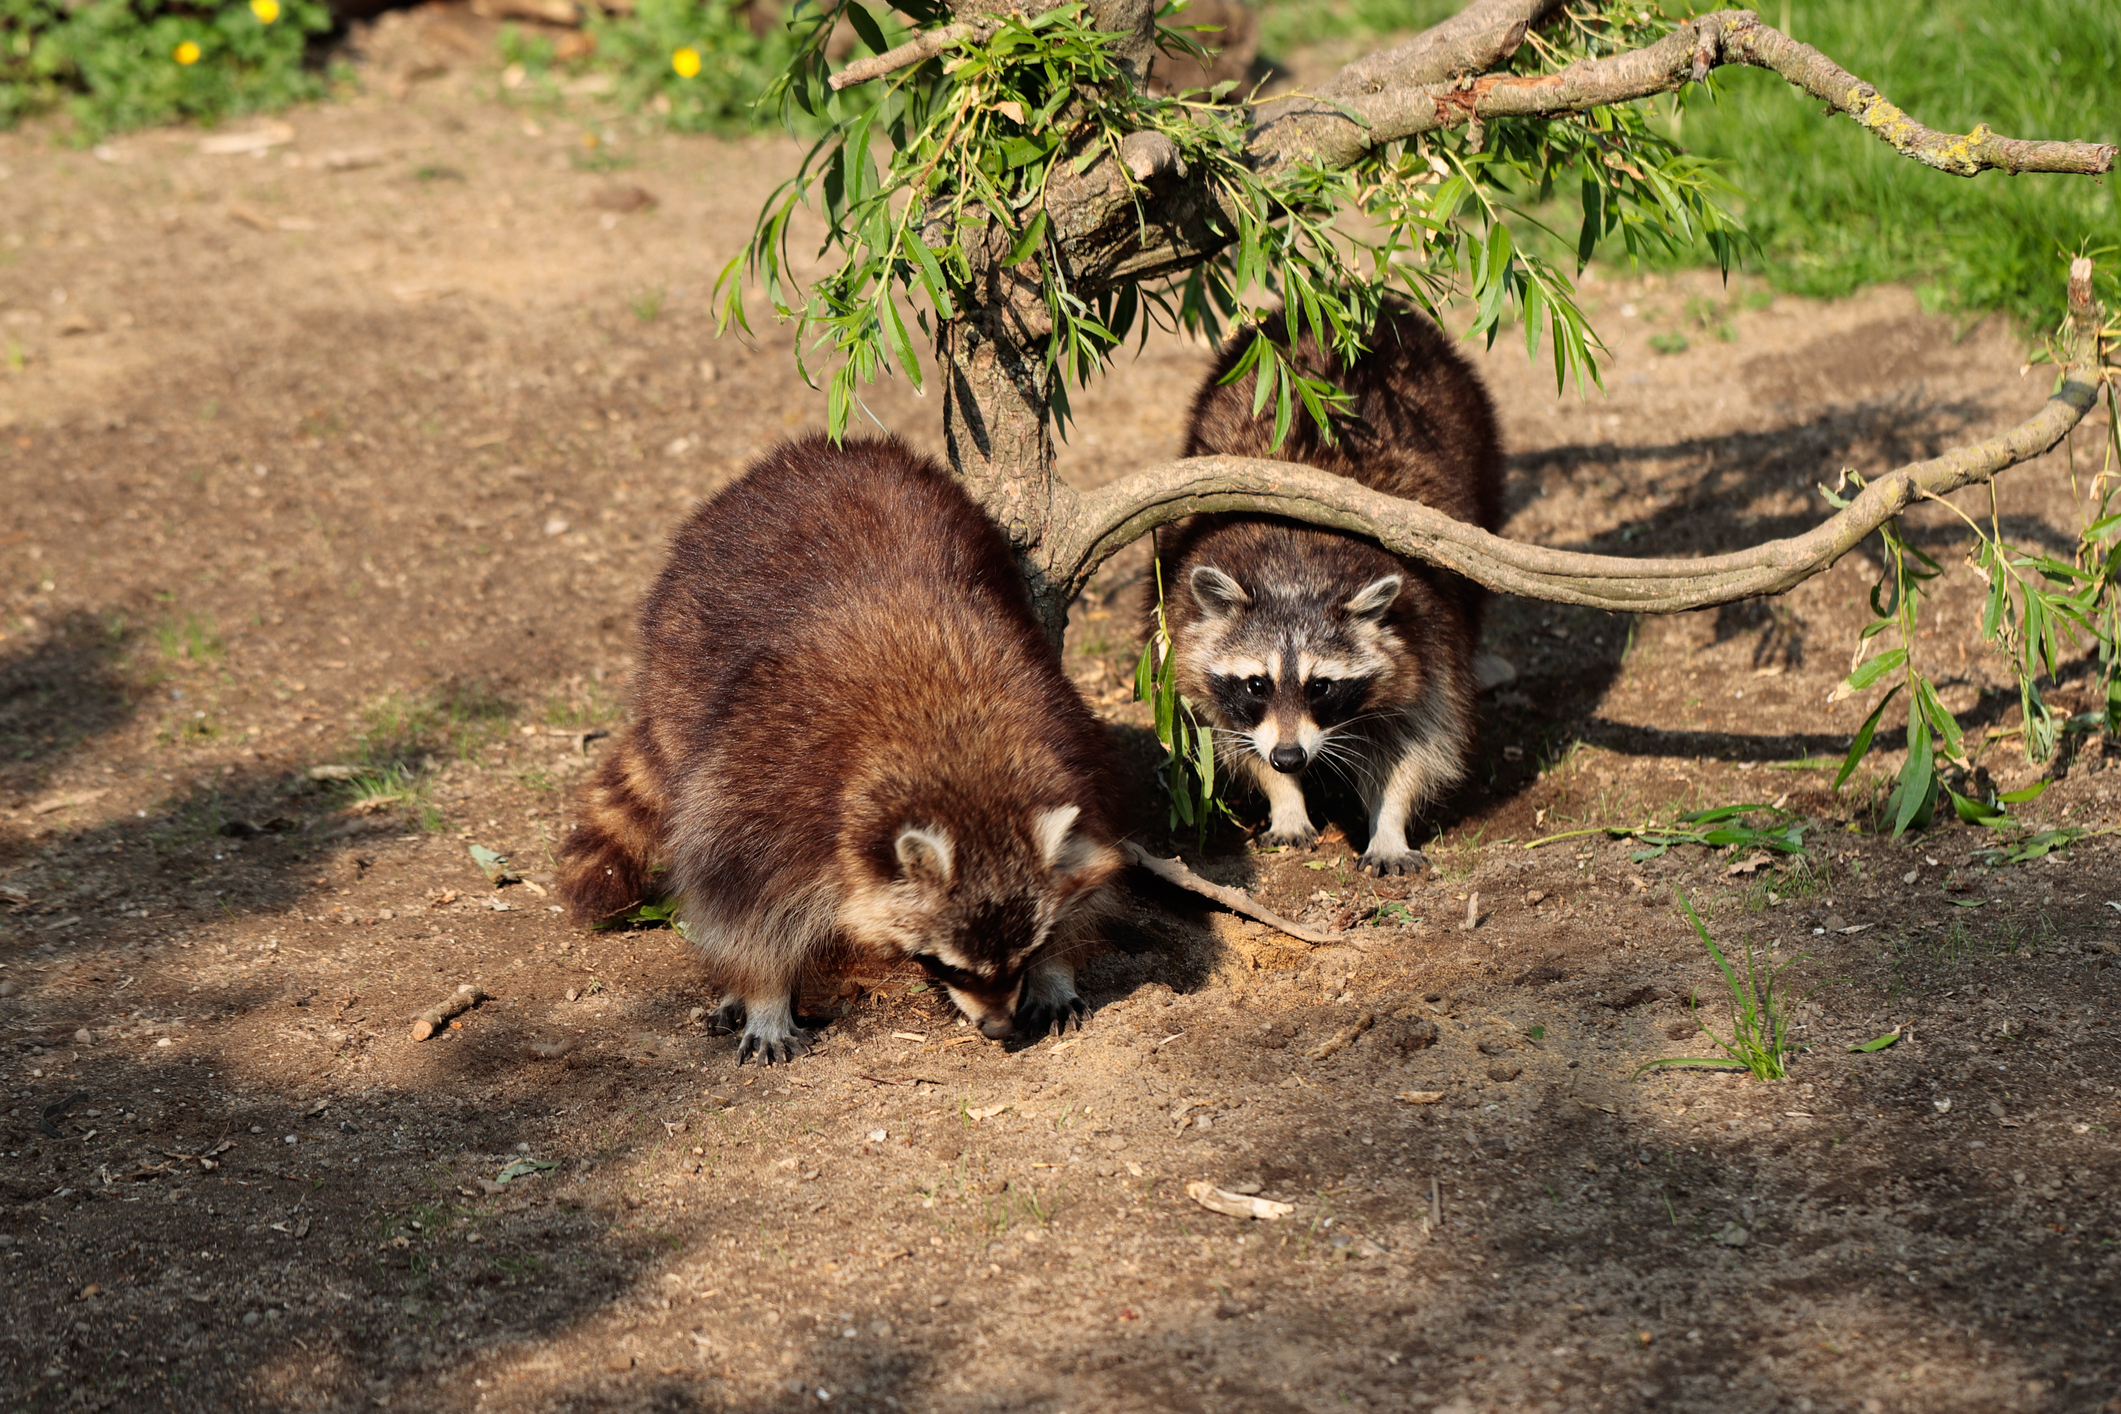 Full body image of two common raccoons.